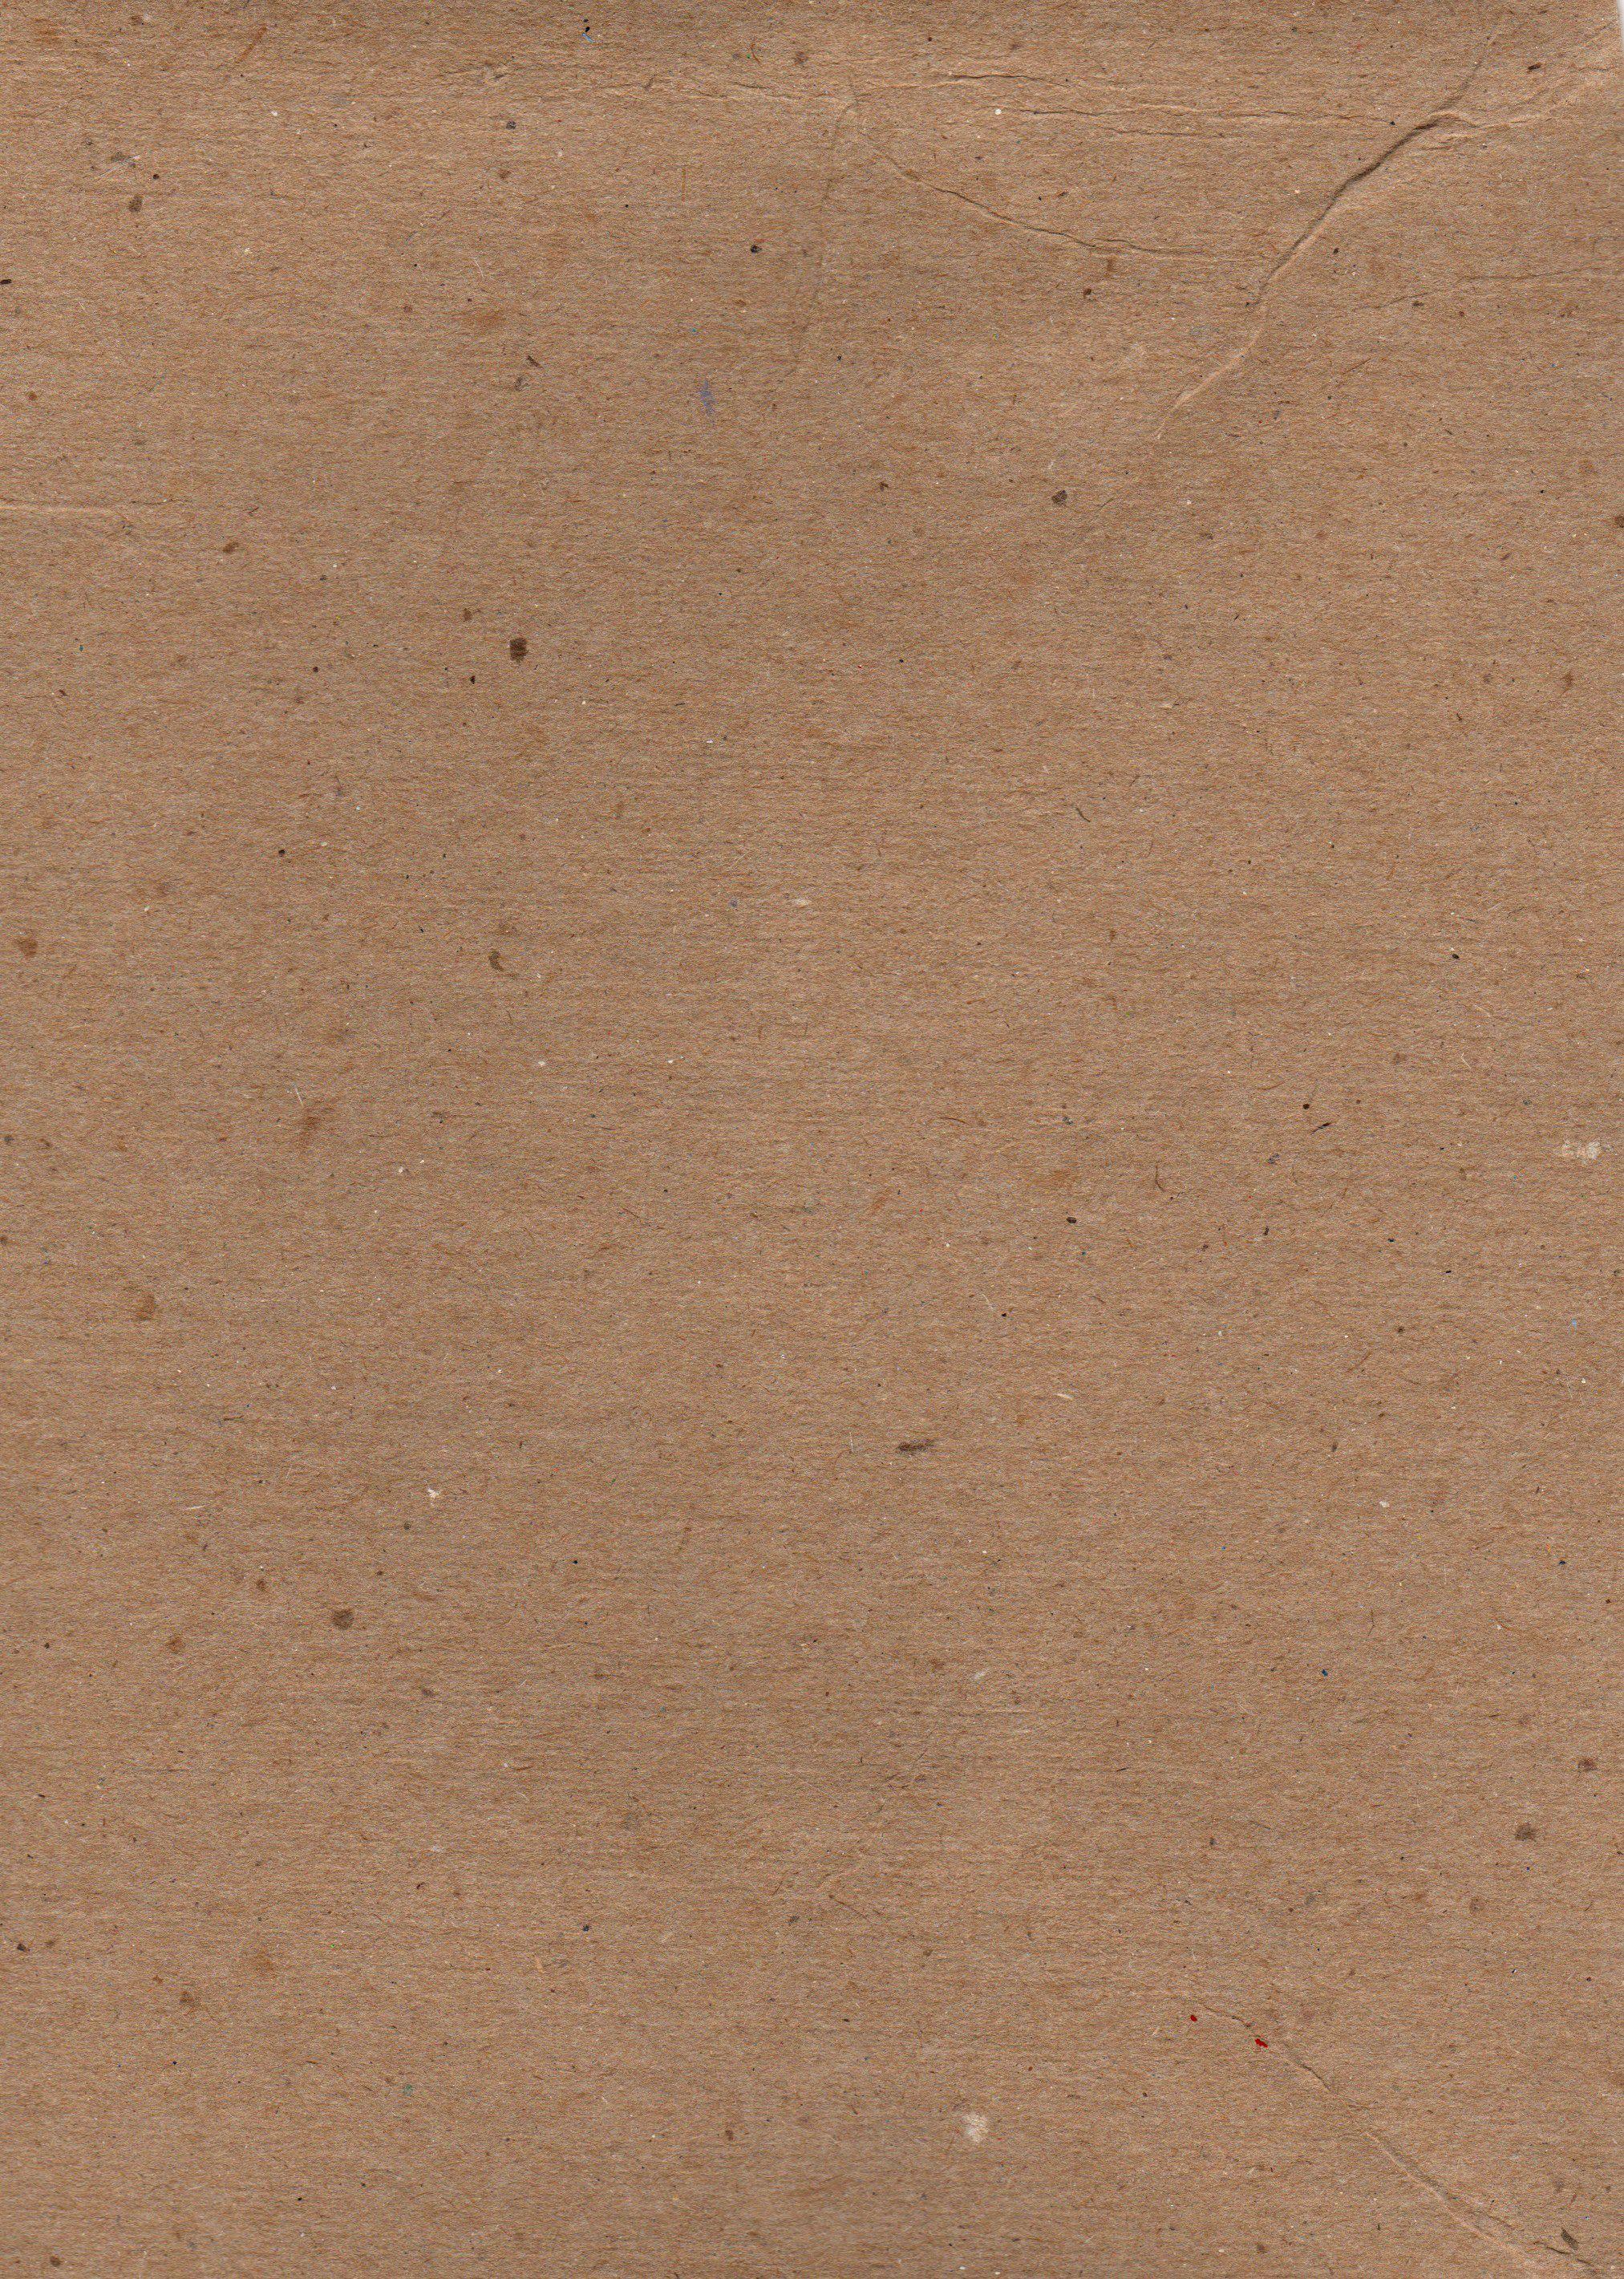 Brown Paper Wallpaper Free Brown Paper Background